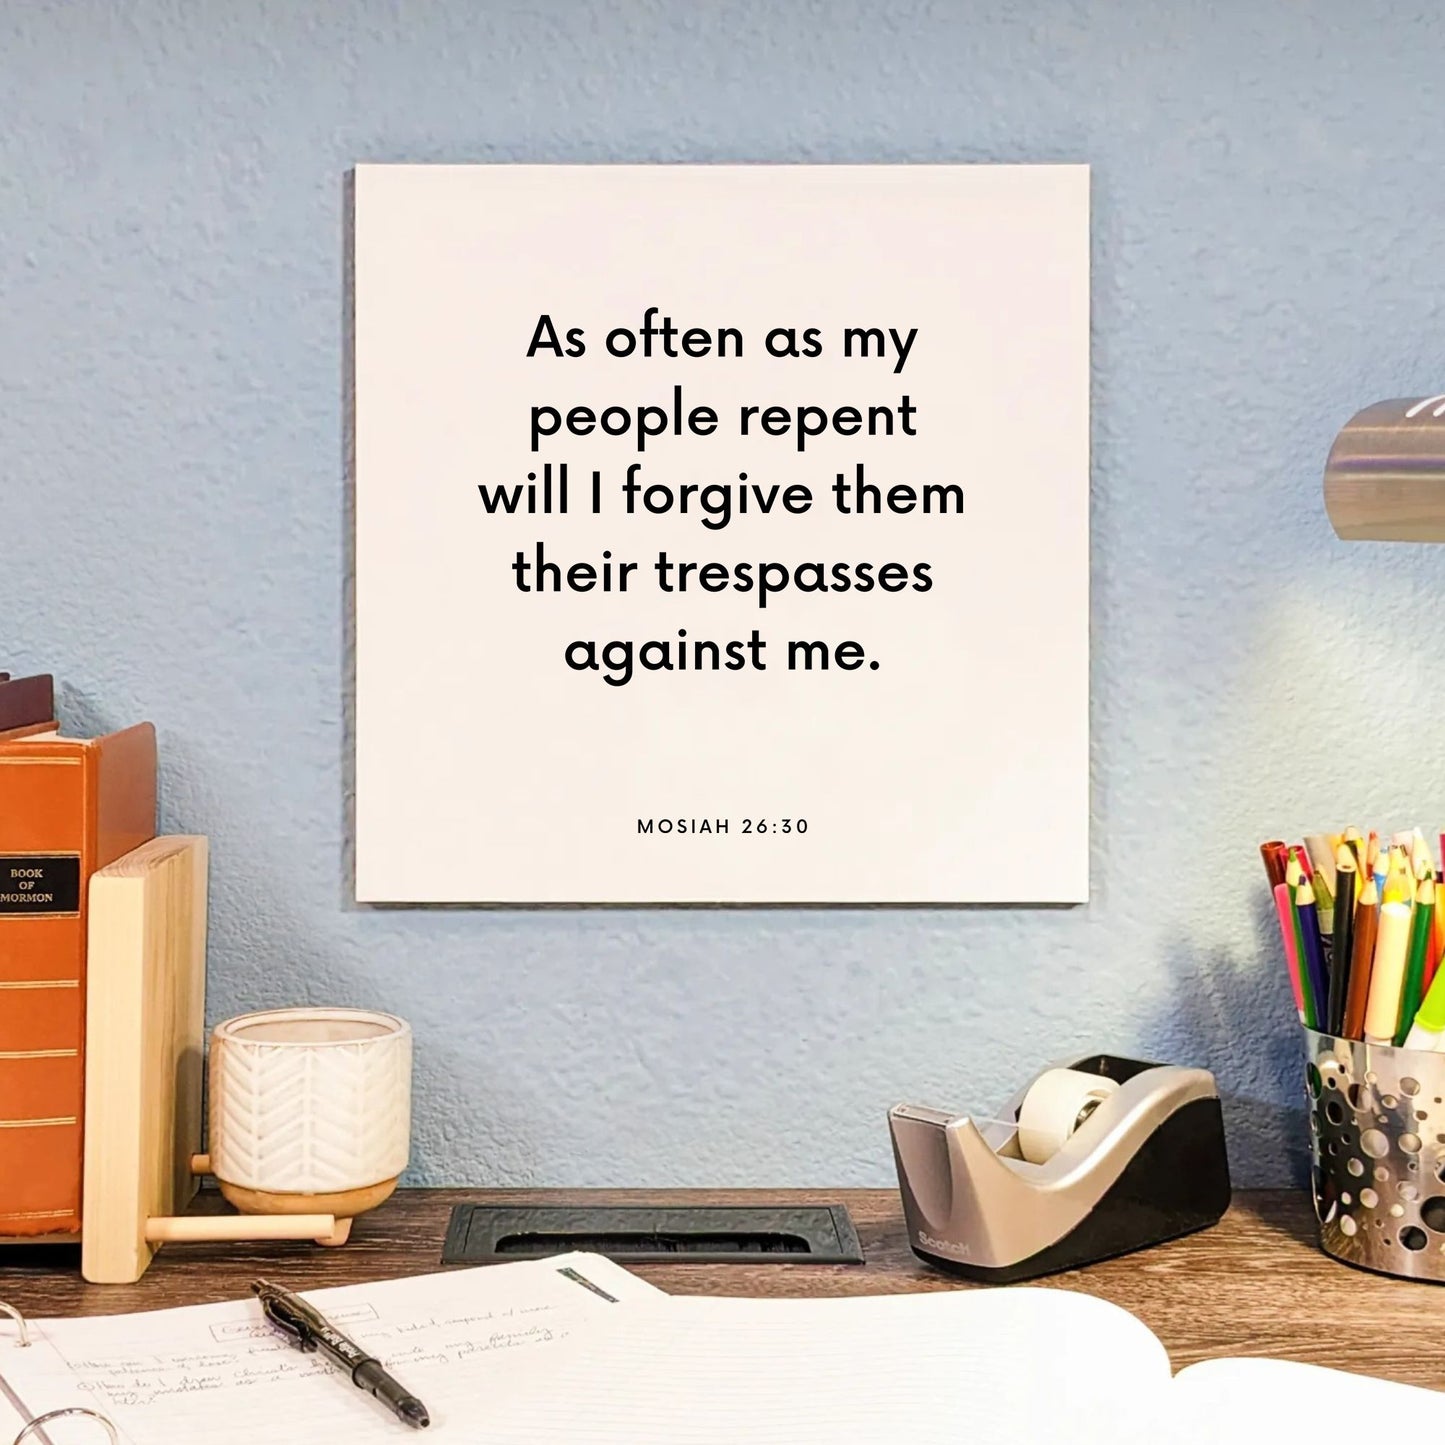 Desk mouting of the scripture tile for Mosiah 26:30 - "As often as my people repent will I forgive them"